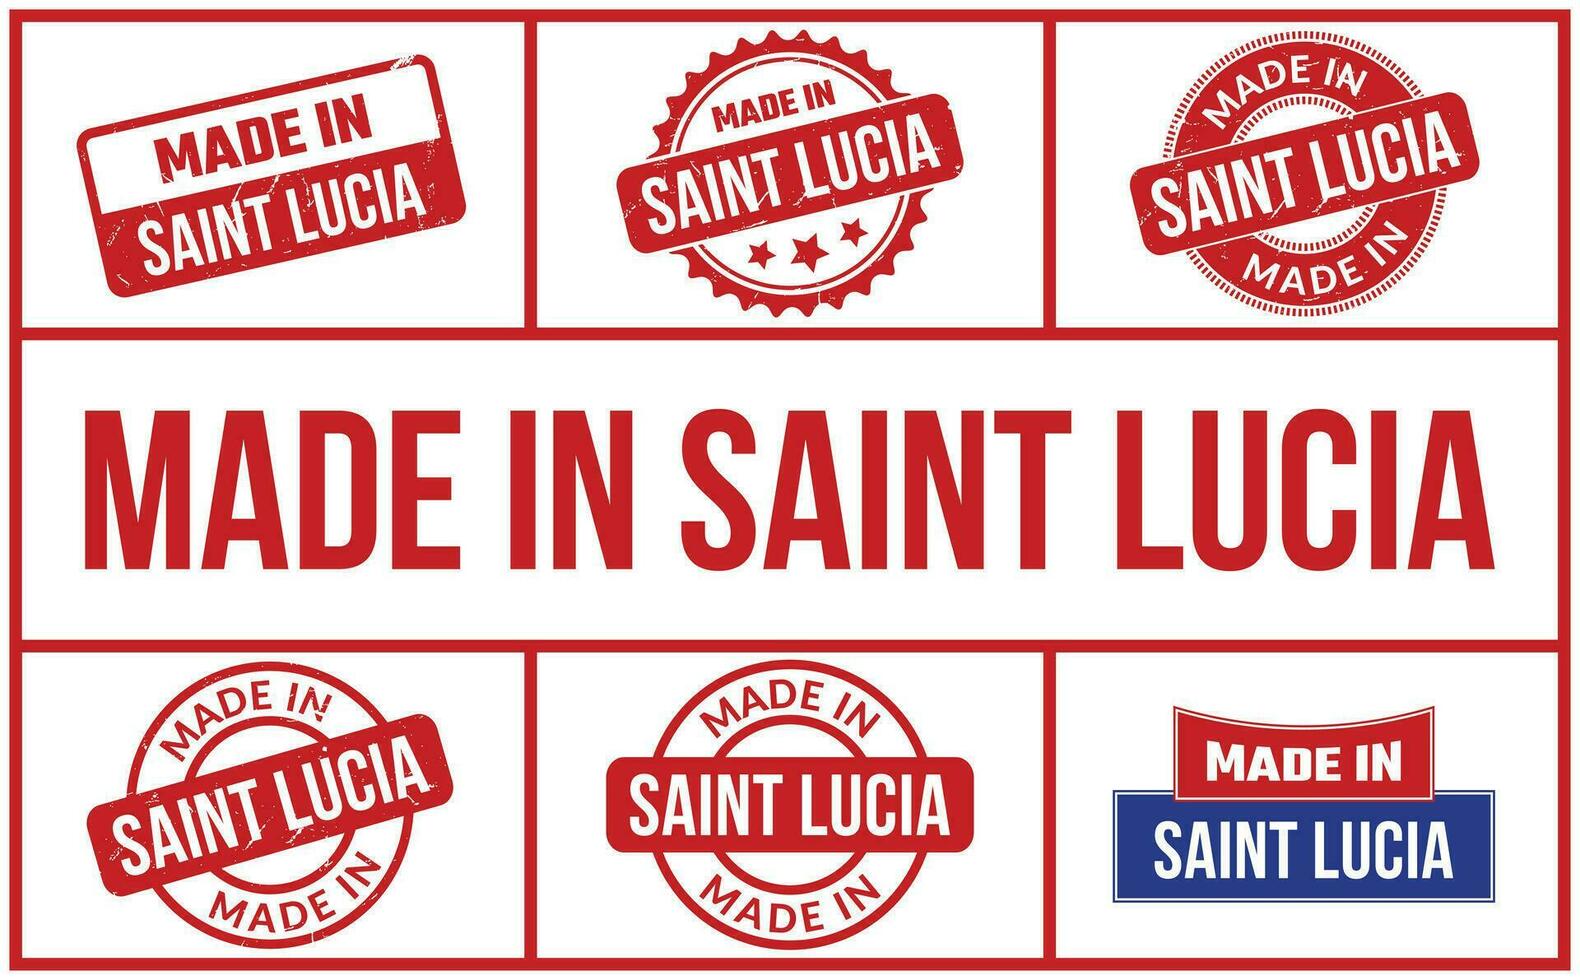 Made In Saint Lucia Rubber Stamp Set vector